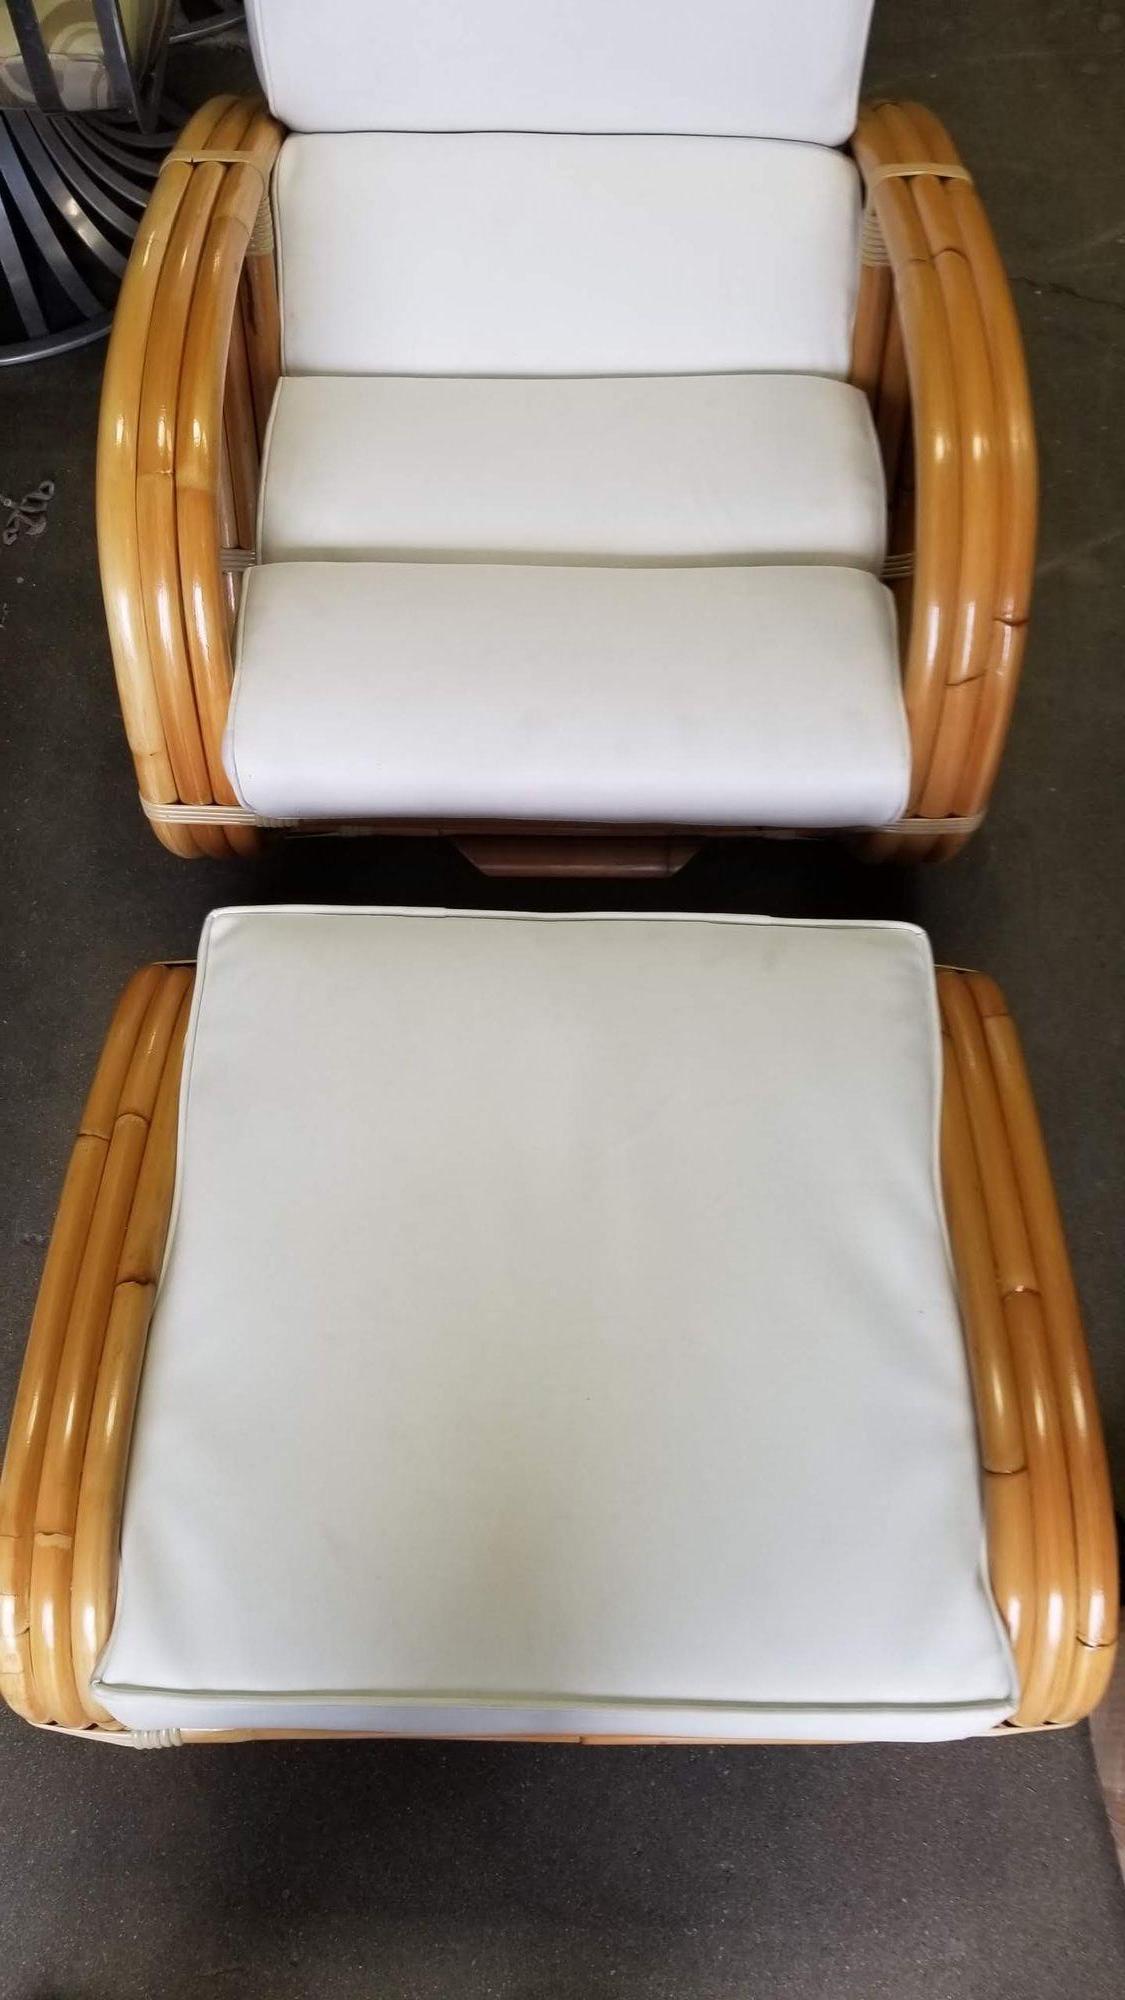 Restored Reverse Pretzel Three Strand Lounge Chair and Matching Ottoman In Excellent Condition For Sale In Van Nuys, CA